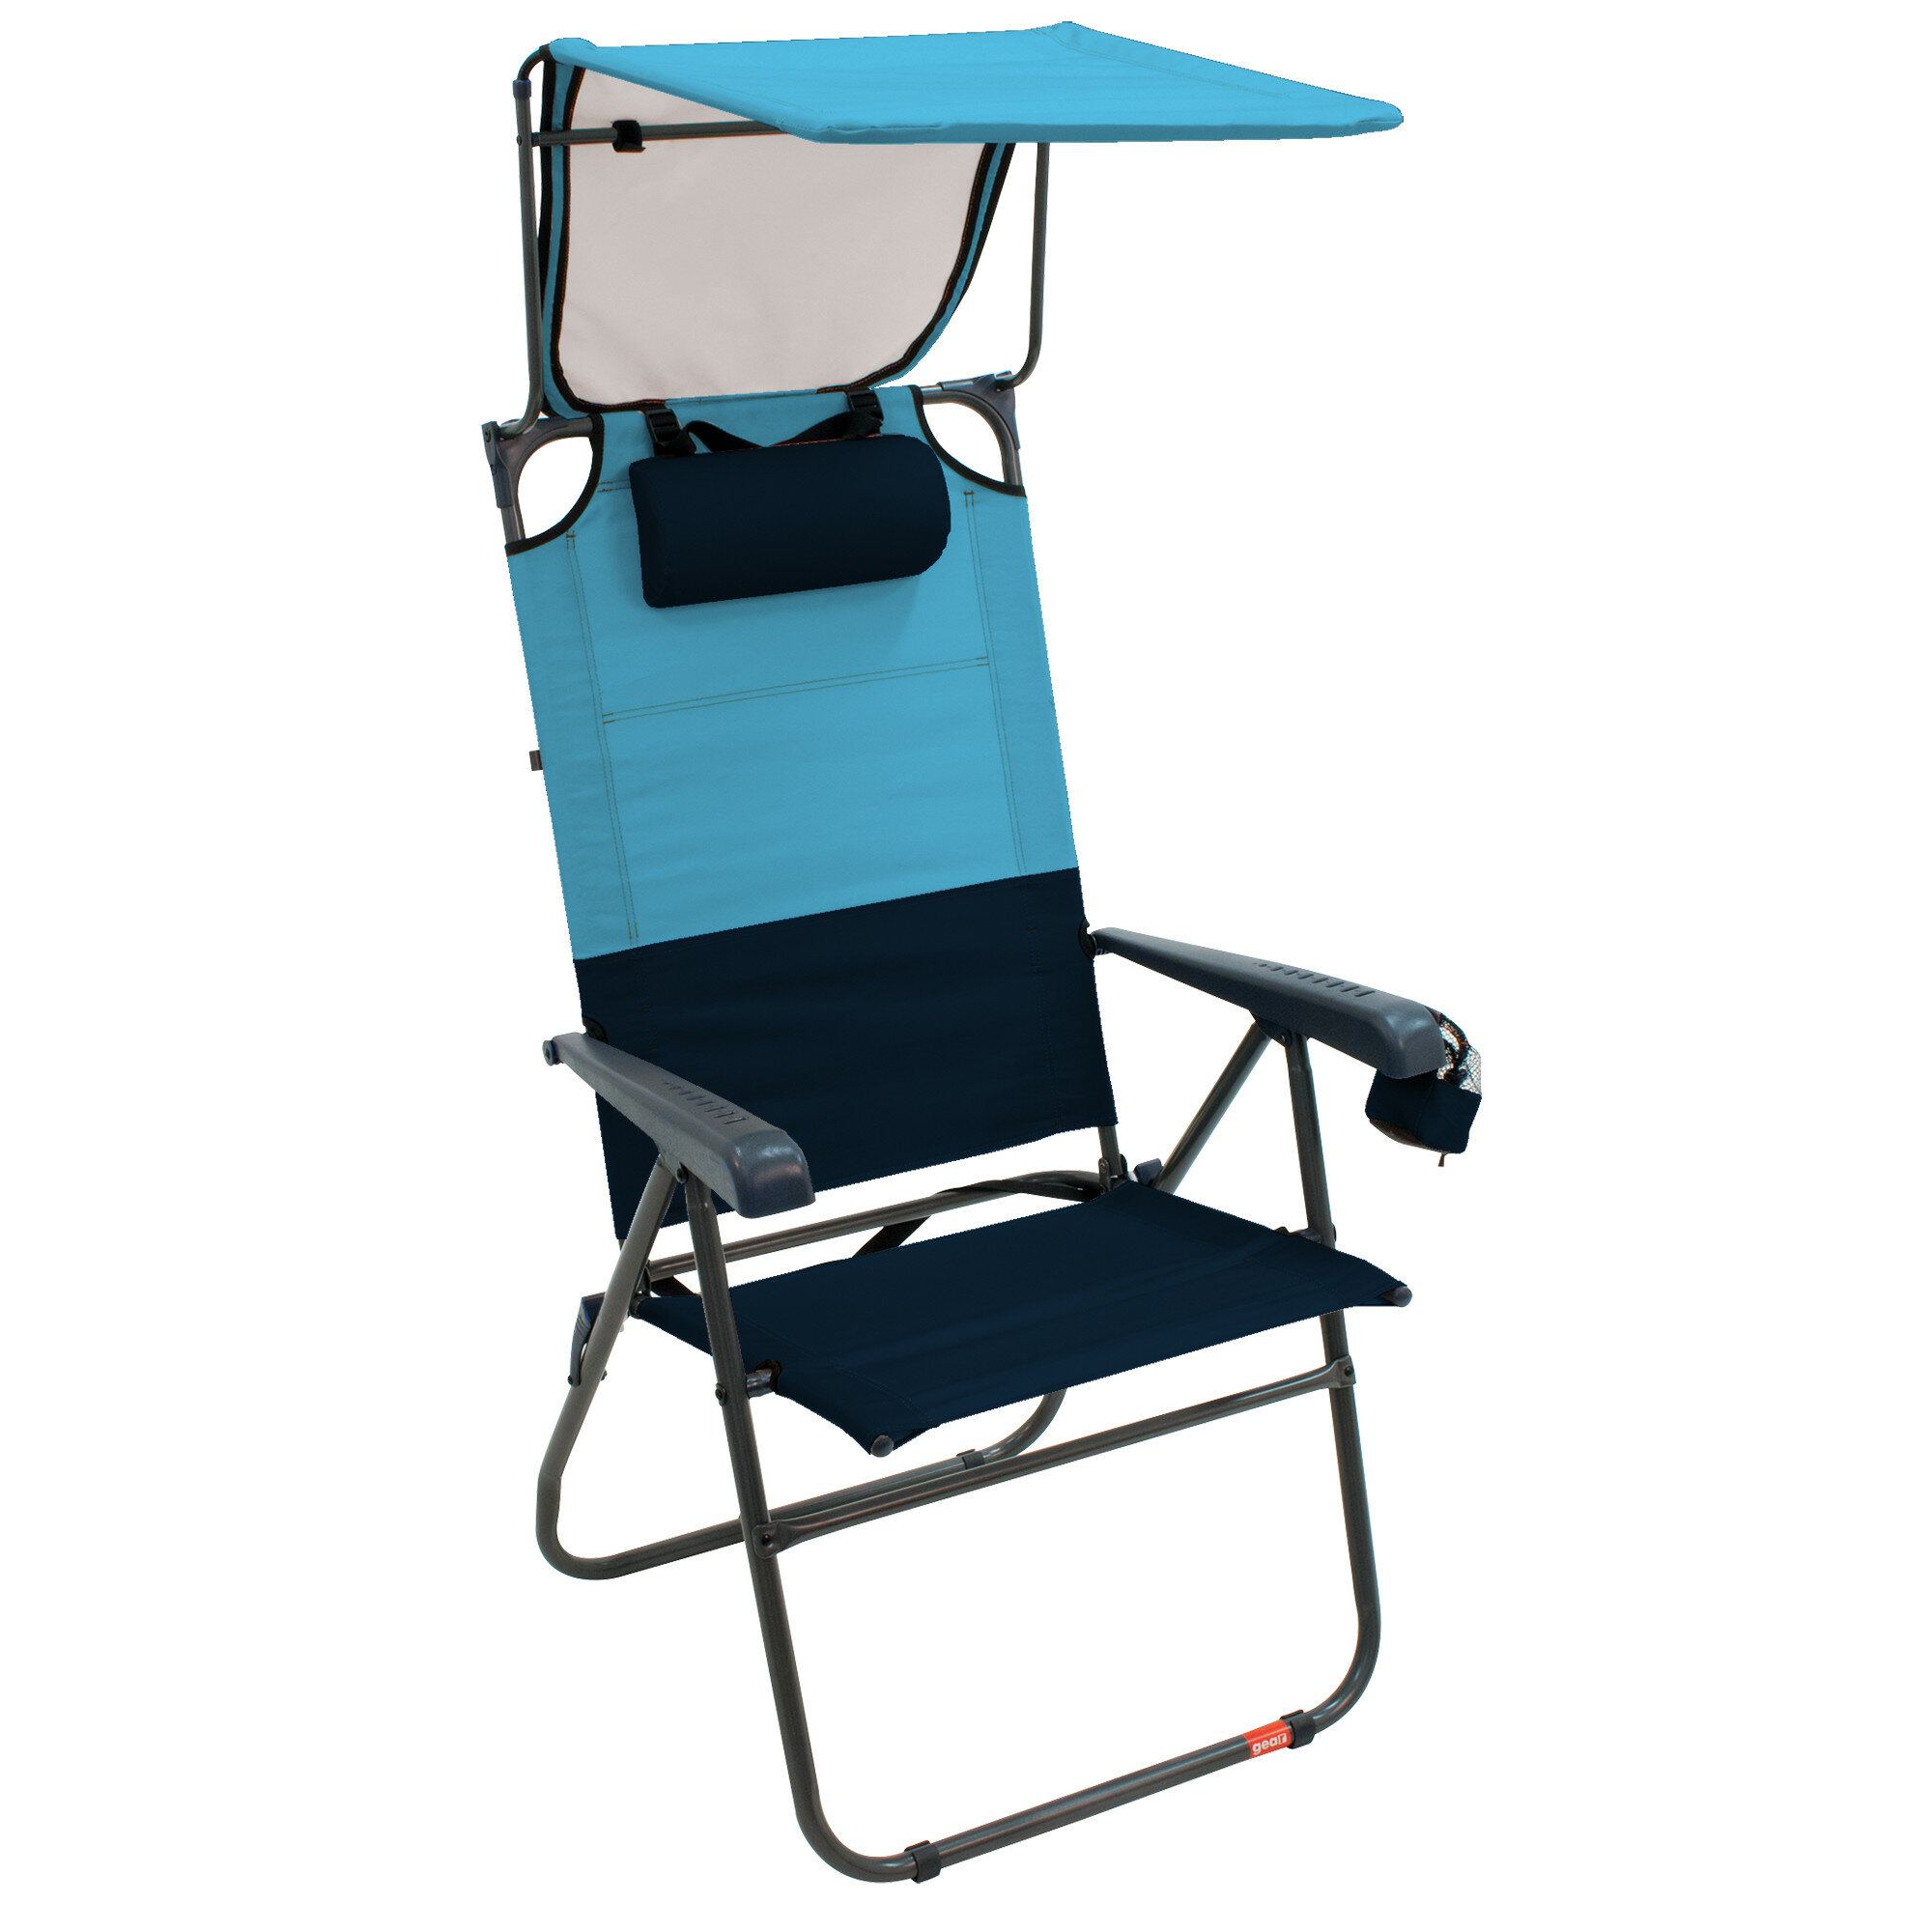 chair with shade canopy